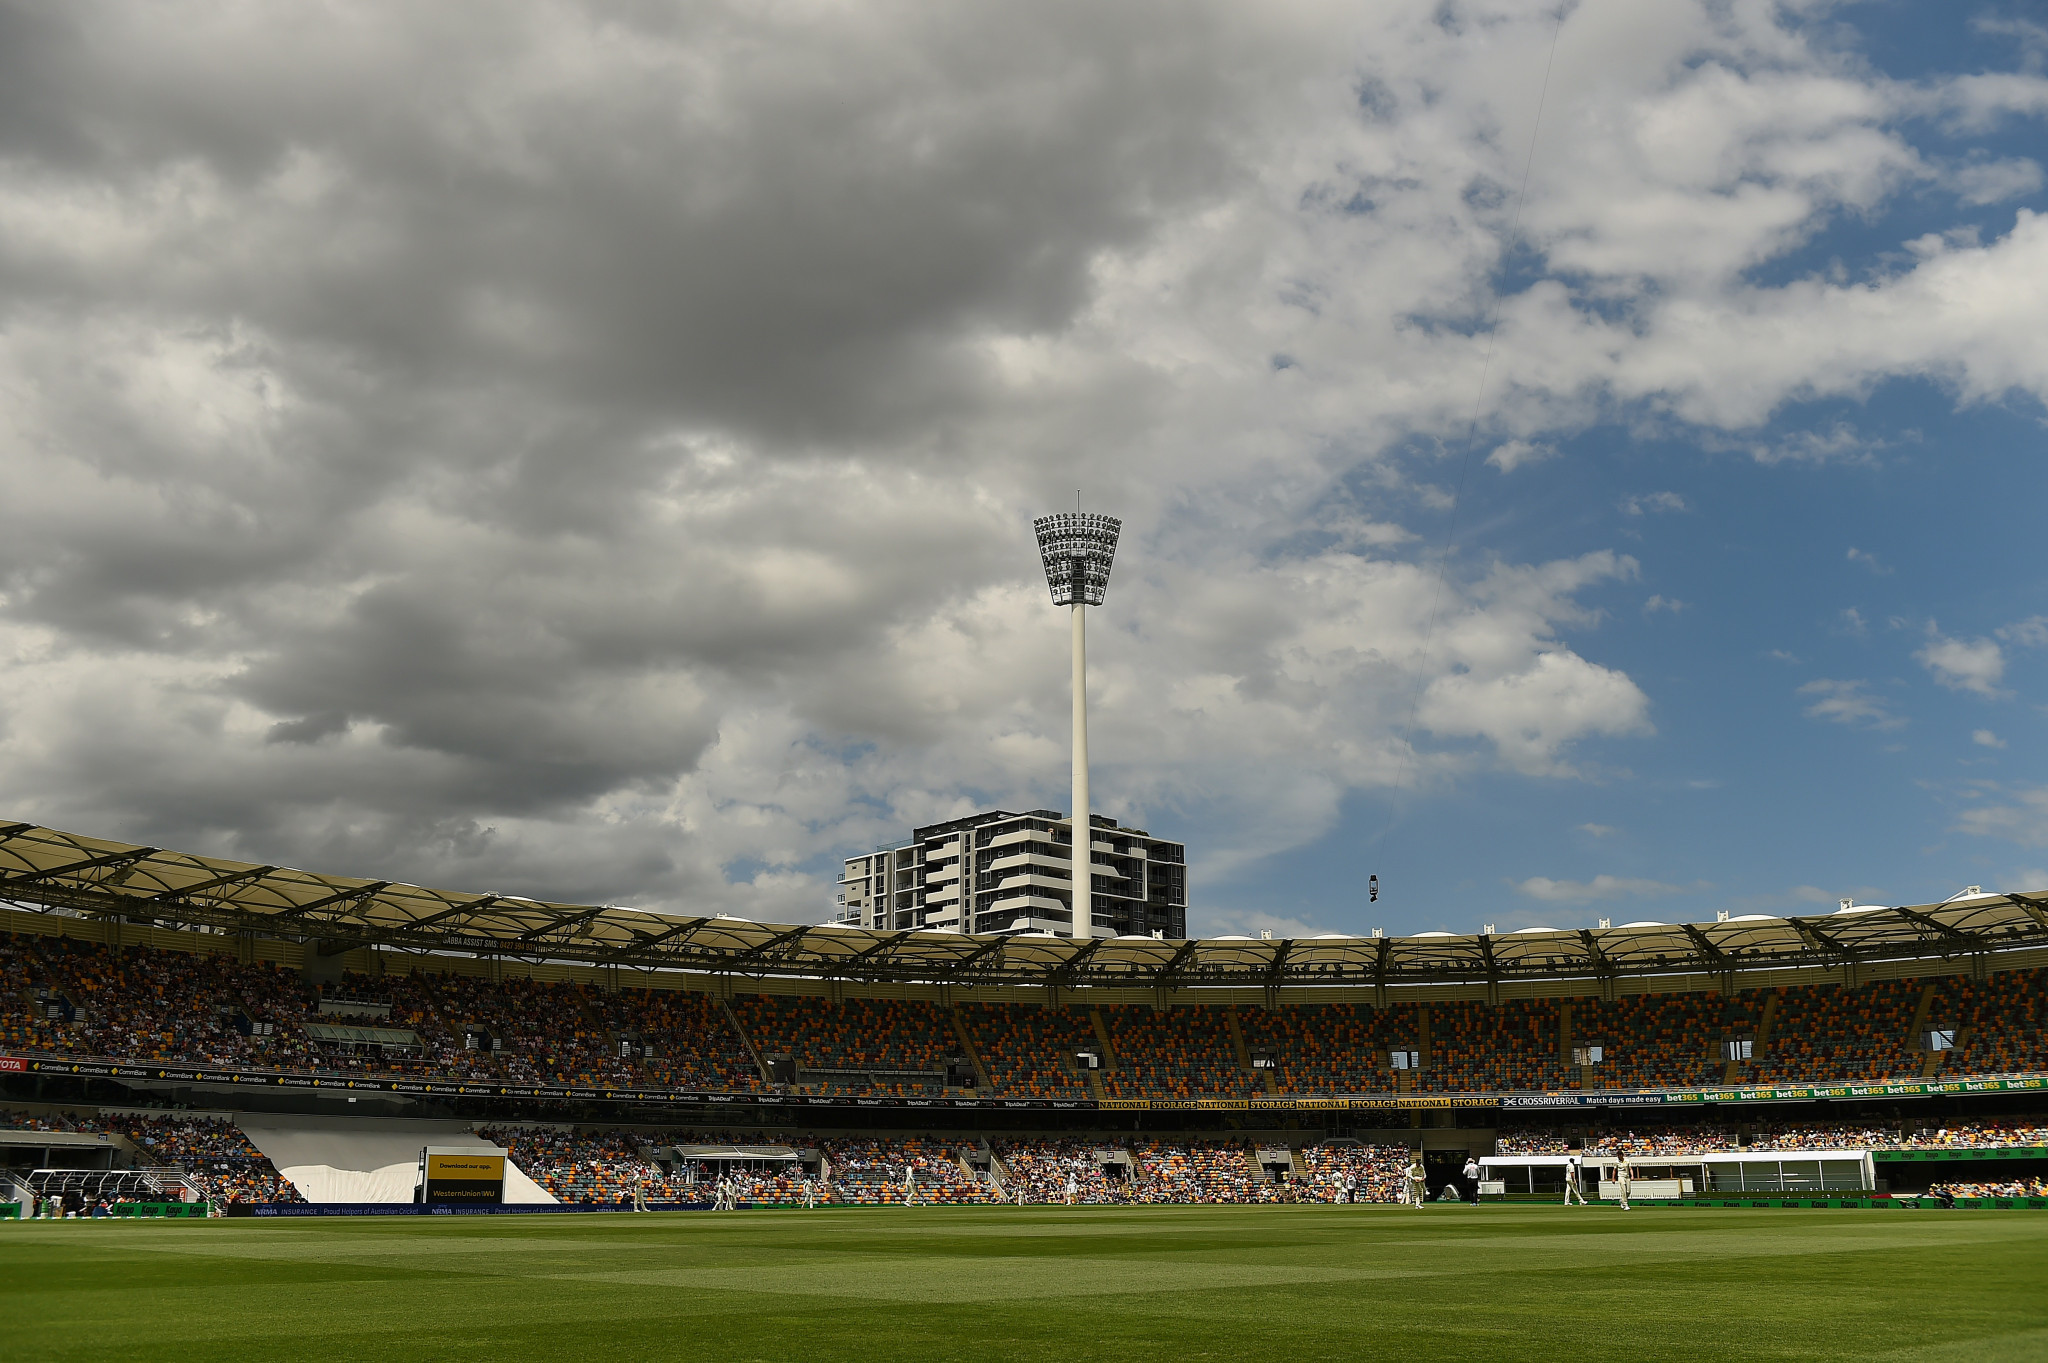 Talks are continuing between the State and Federal Government to find a solution to fund the redevelopment of the Gabba ©Getty Images